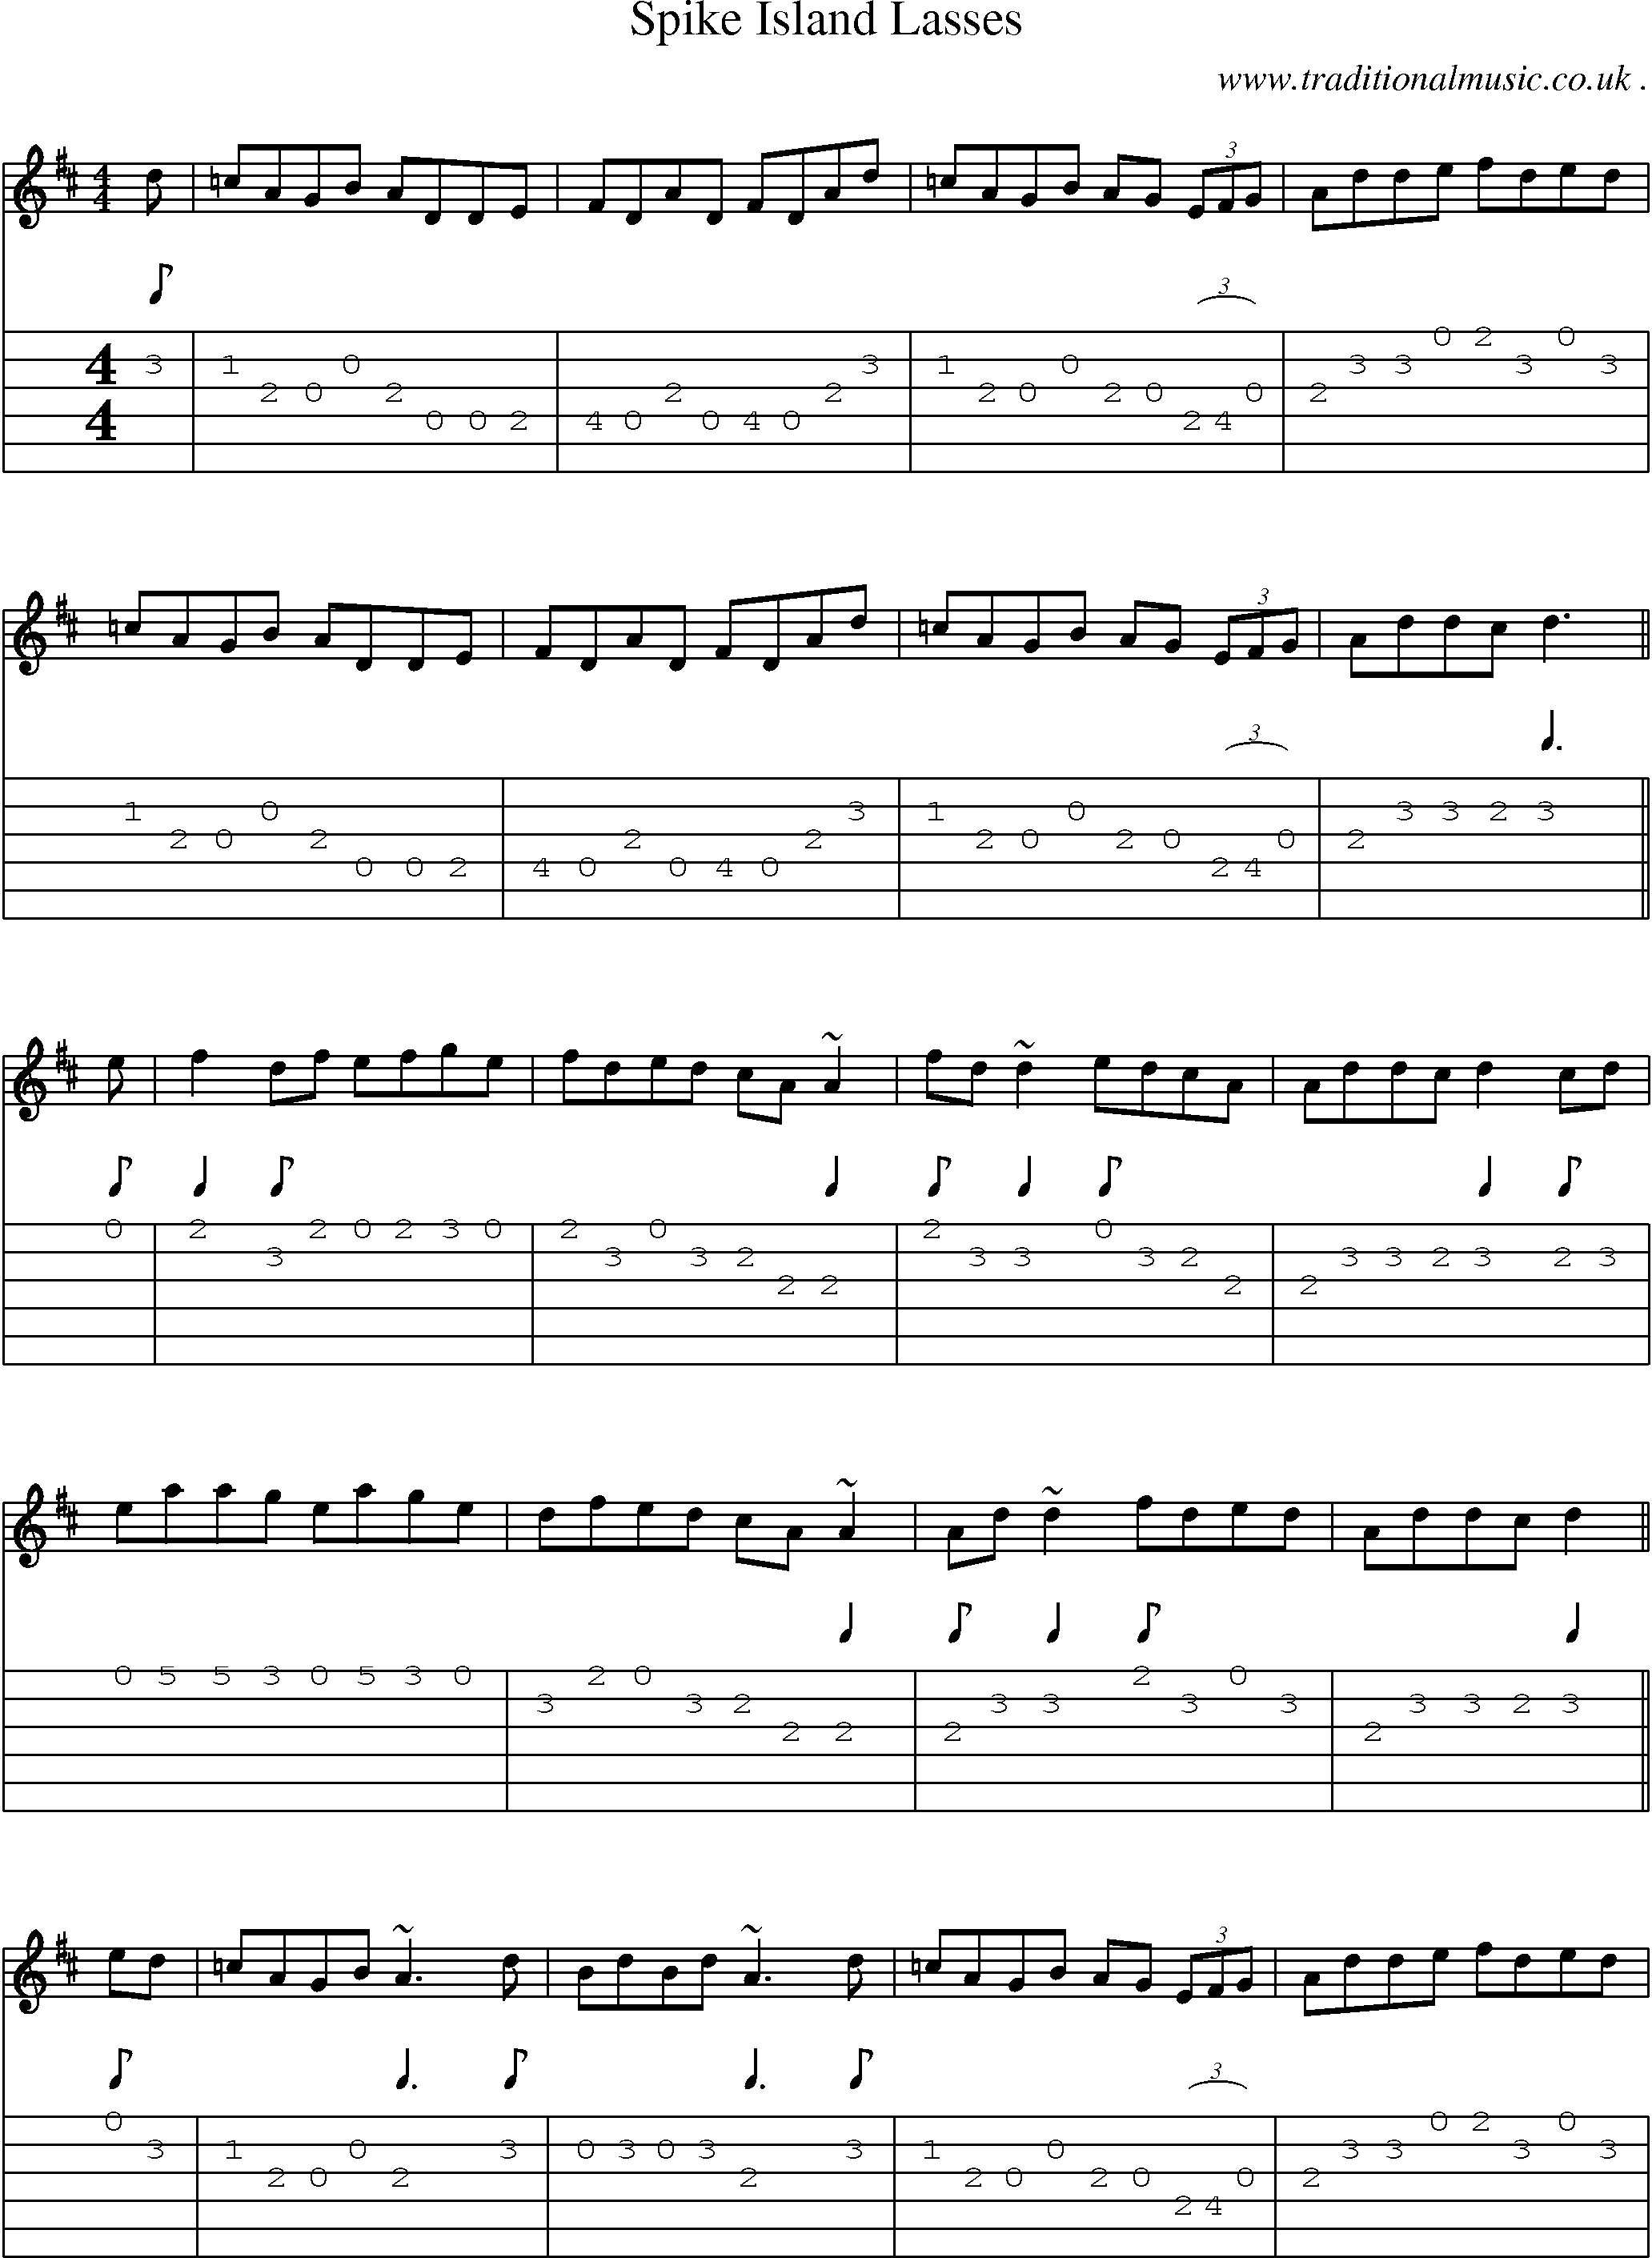 Music Score and Guitar Tabs for Spike Island Lasses